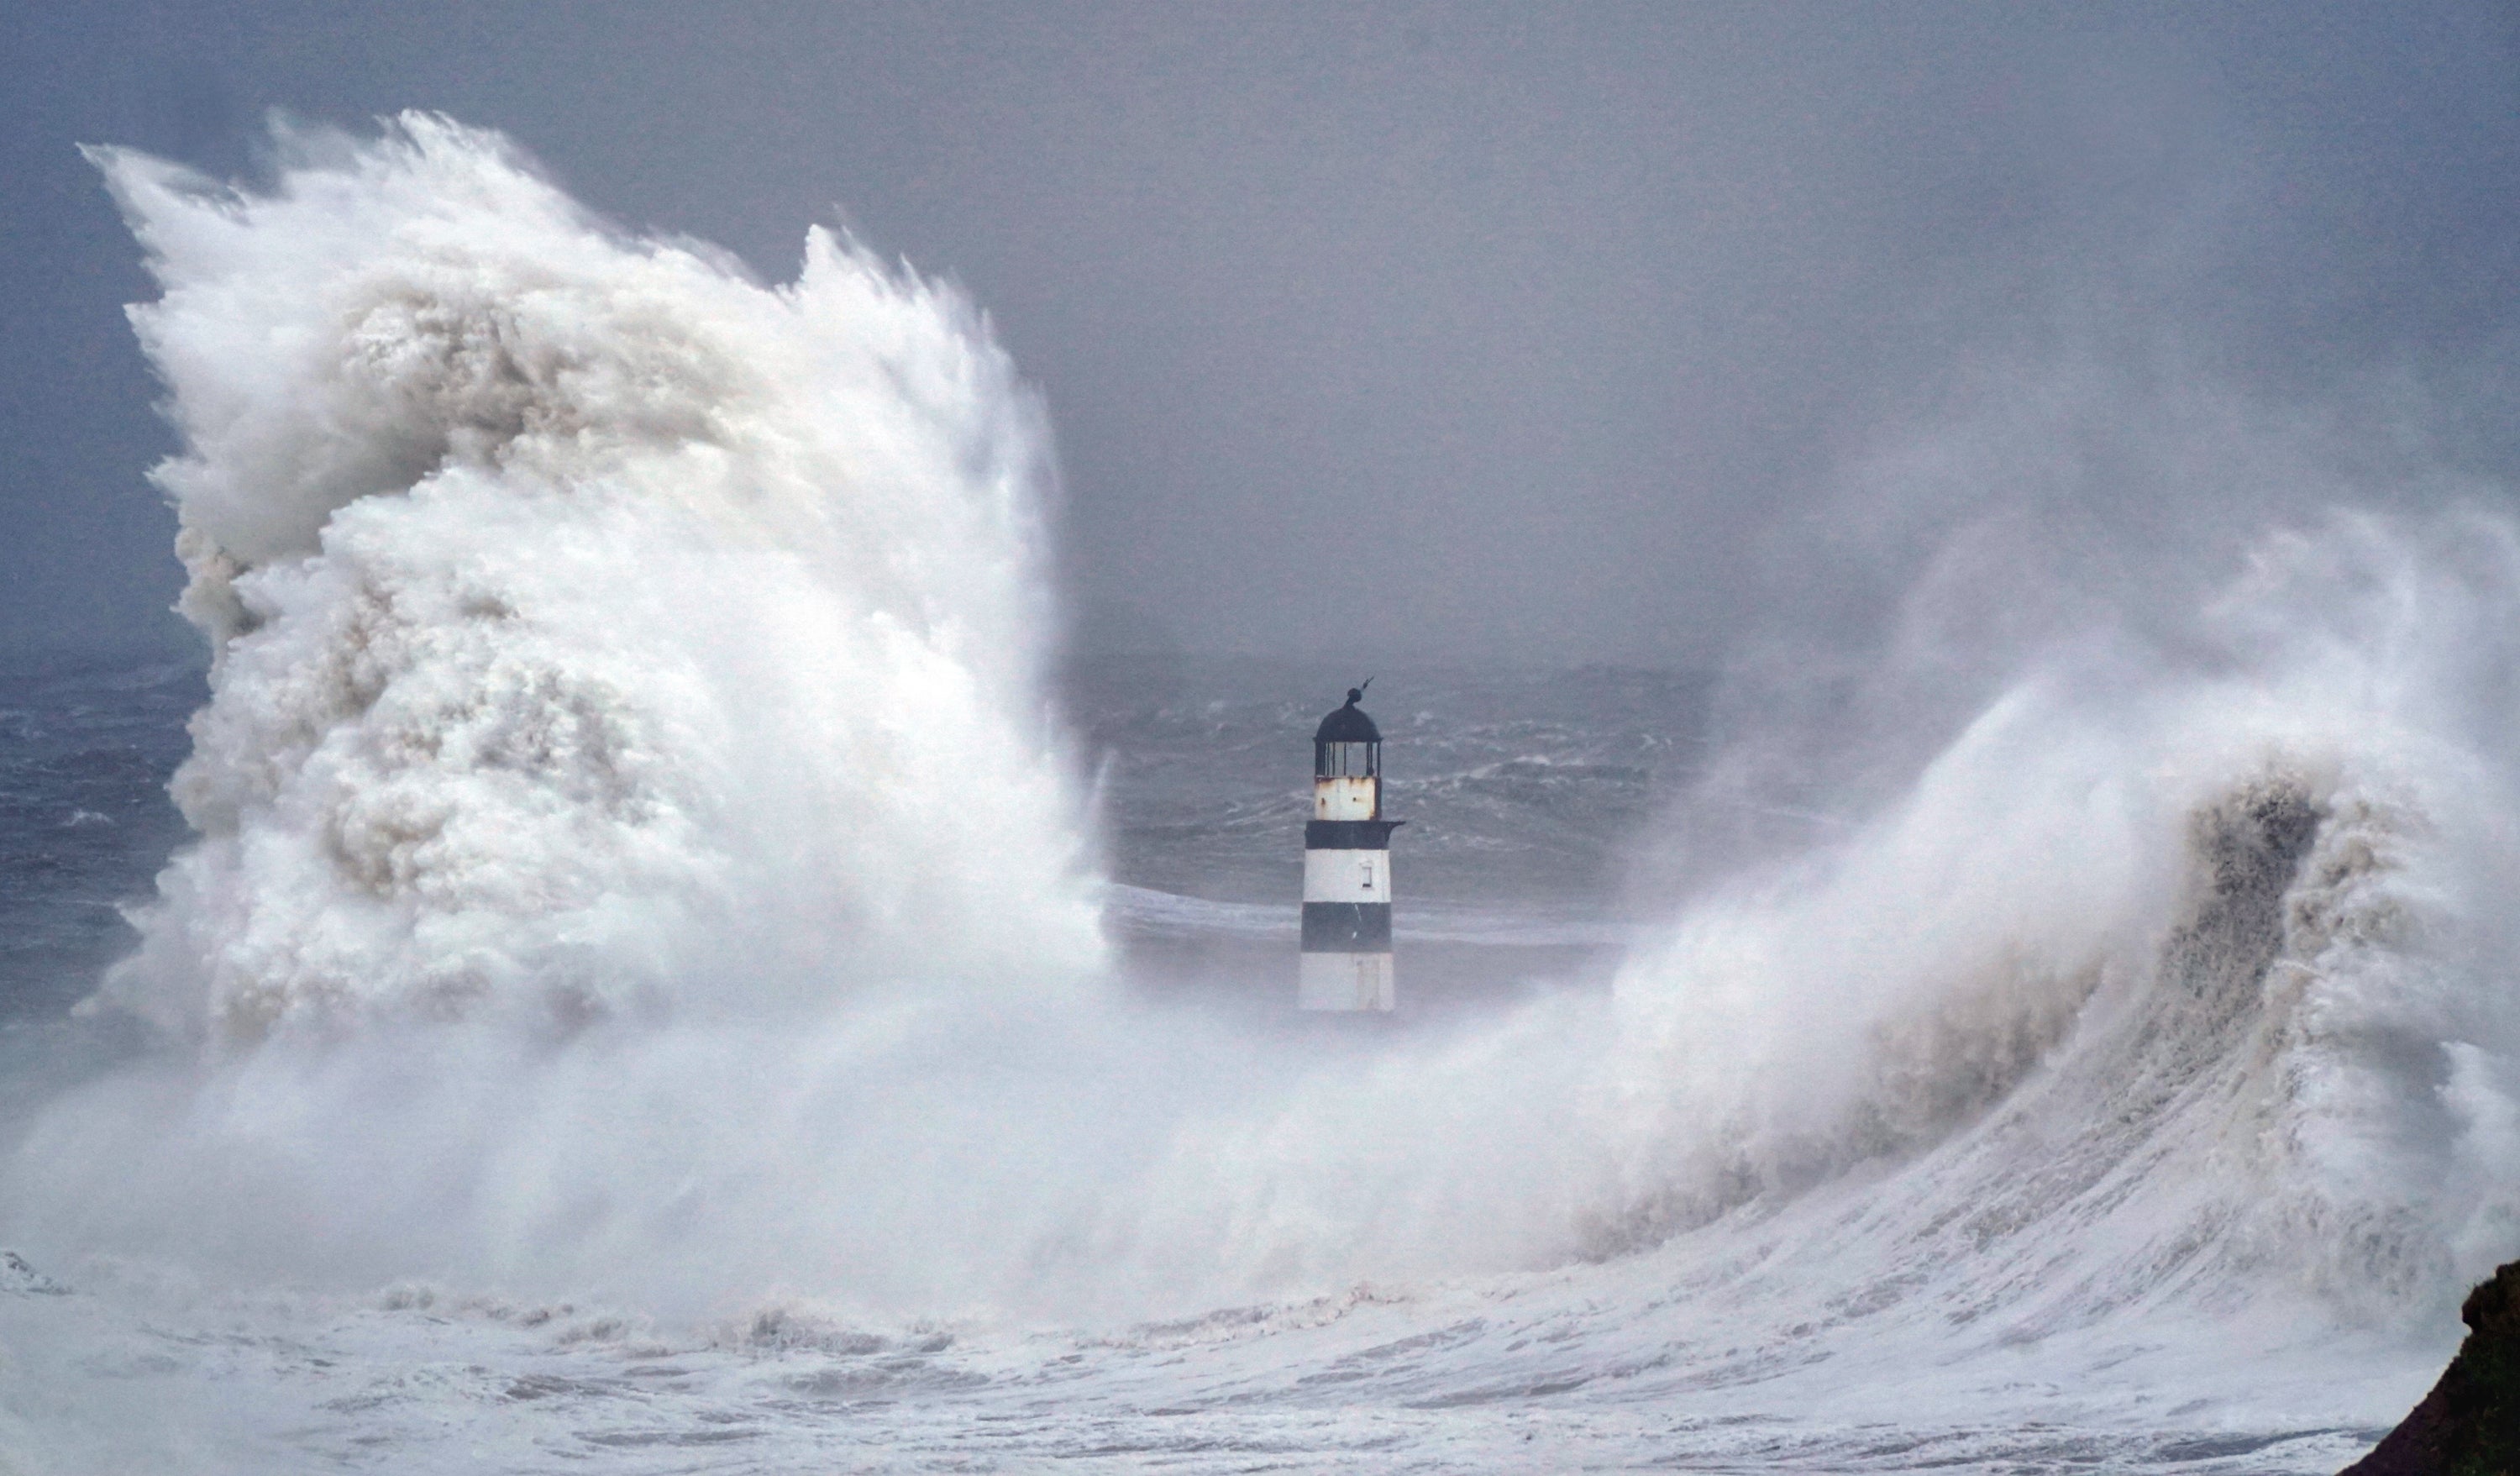 Huge waves crash against the lighthouse in Seaham Harbour, County Durham, during the tail end of Storm Arwen last November